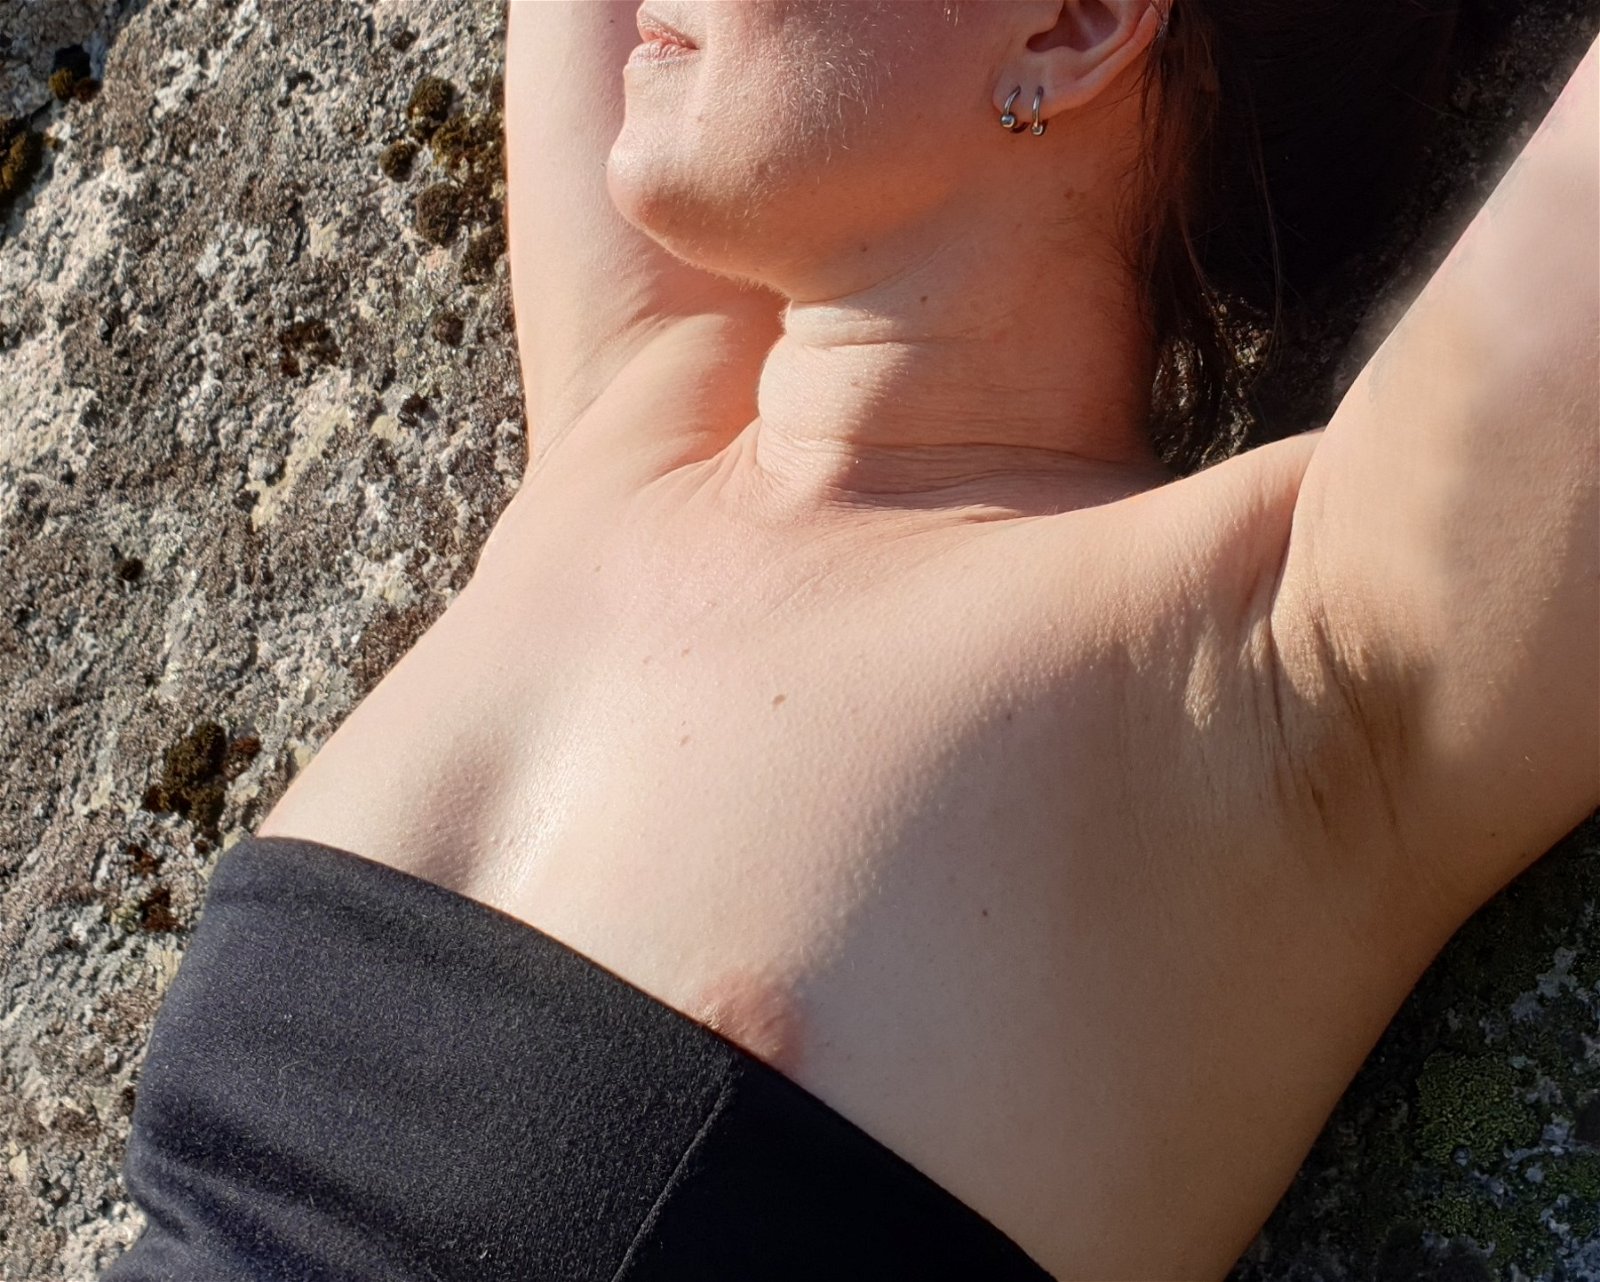 Photo by cmandwife with the username @cmandwife,  May 29, 2020 at 5:40 AM. The post is about the topic Amateurs and the text says 'That dress is about to slip off :)

#homemade #amateur #nip slip #sun #outdoors #wife #milf #realcouple'